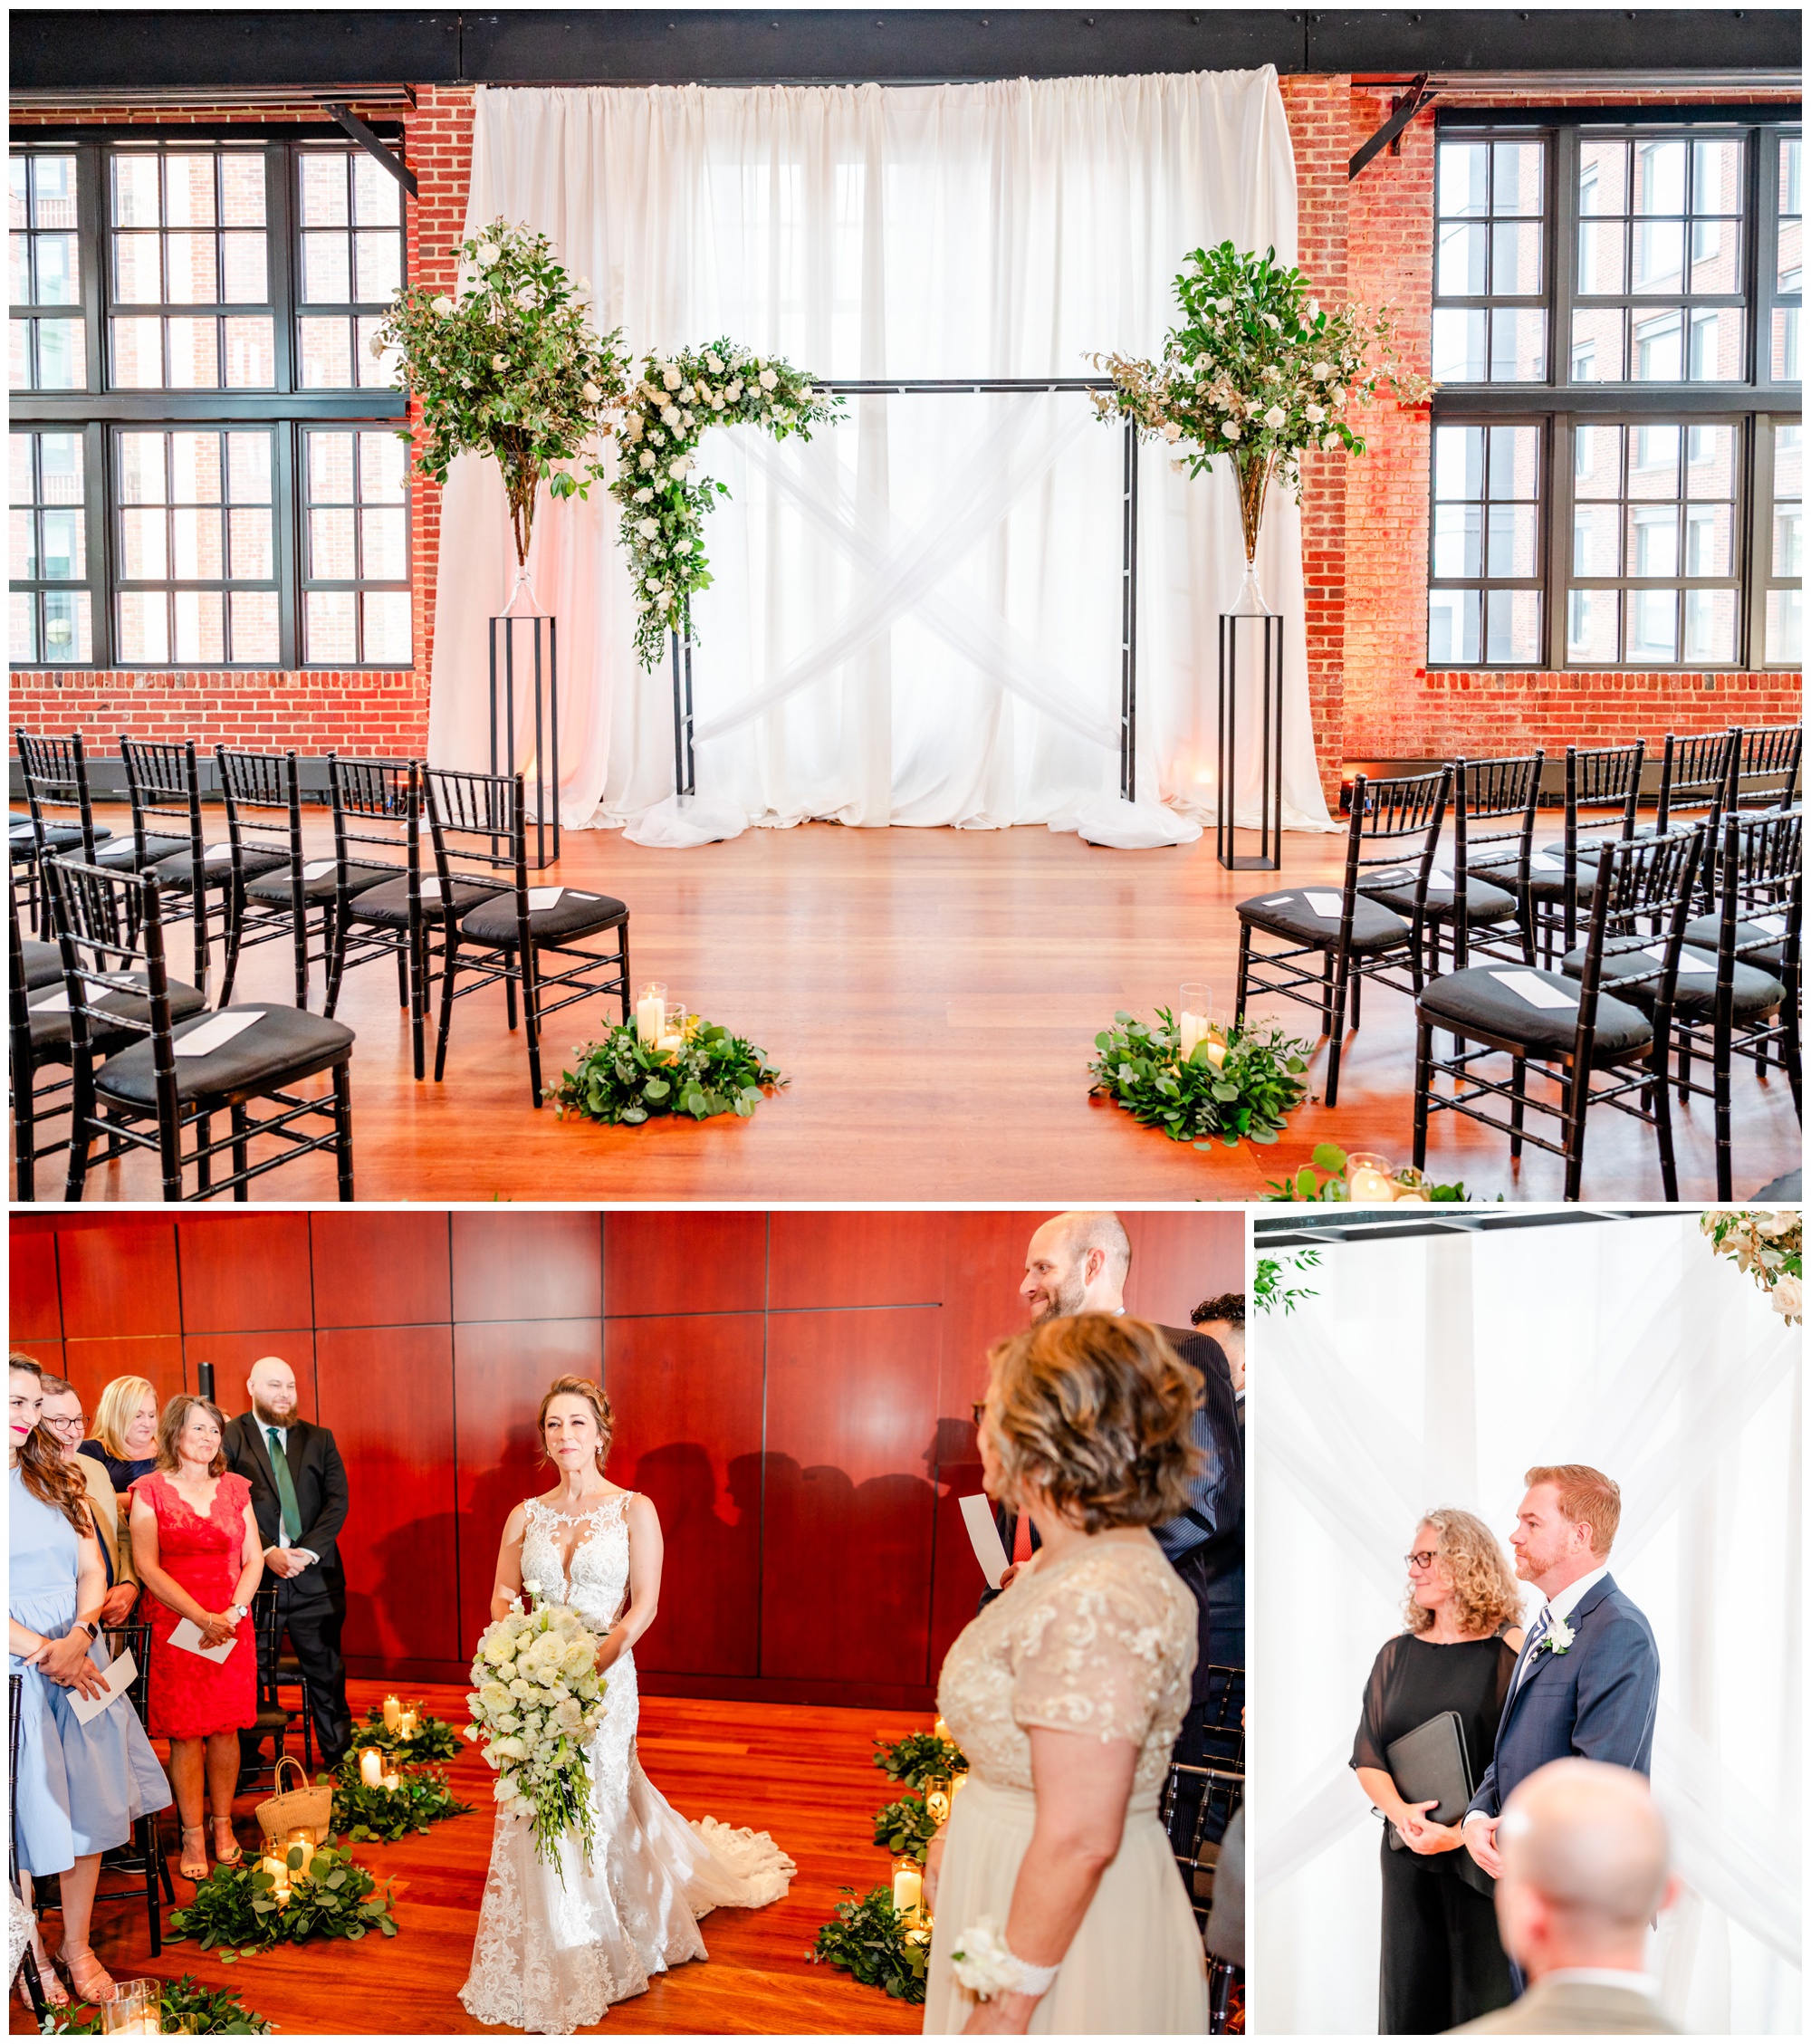 romantic Ritz Carlton Georgetown wedding, summer wedding aesthetic, green and white aesthetic, summer D.C. wedding, D.C. wedding venues, Ritz Carlton wedding, Washington D.C. wedding, romantic wedding aesthetic, Georgetown wedding, Rachel E.H. Photography, D.C. photographer, greenery alter, bride walking down aisle, groom waiting at alter